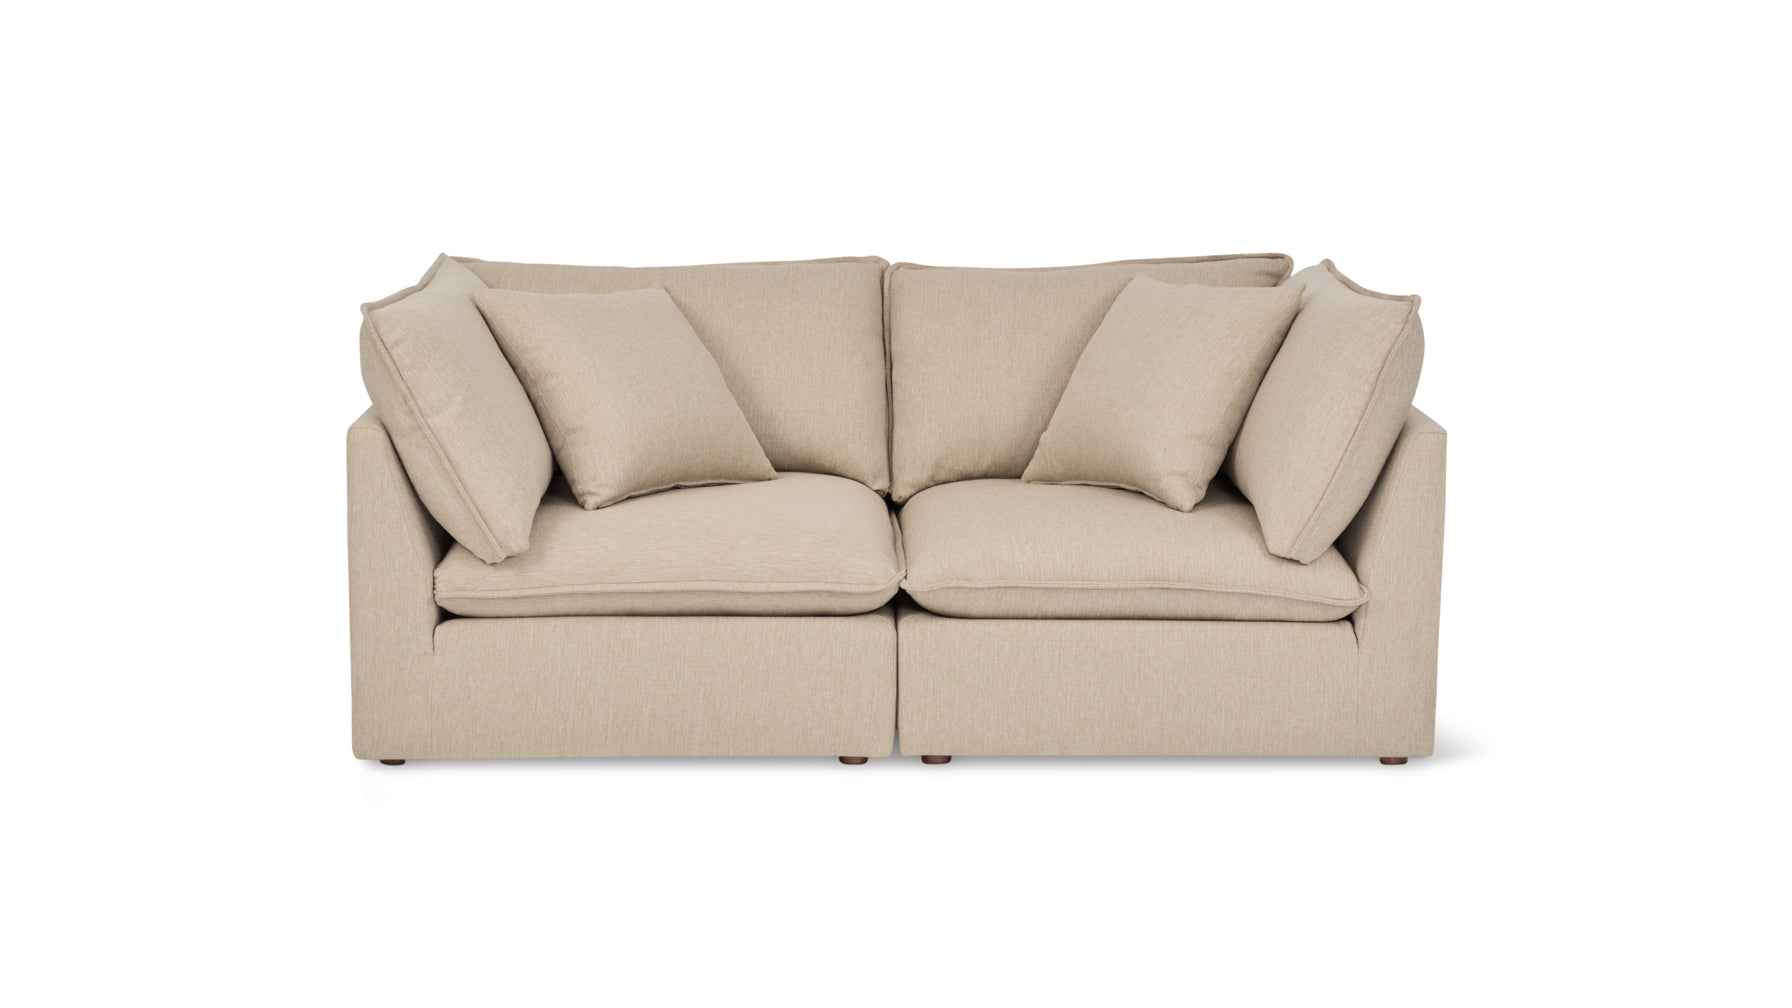 Chill Time 2-Piece Modular Sofa, Biscuit - Image 1